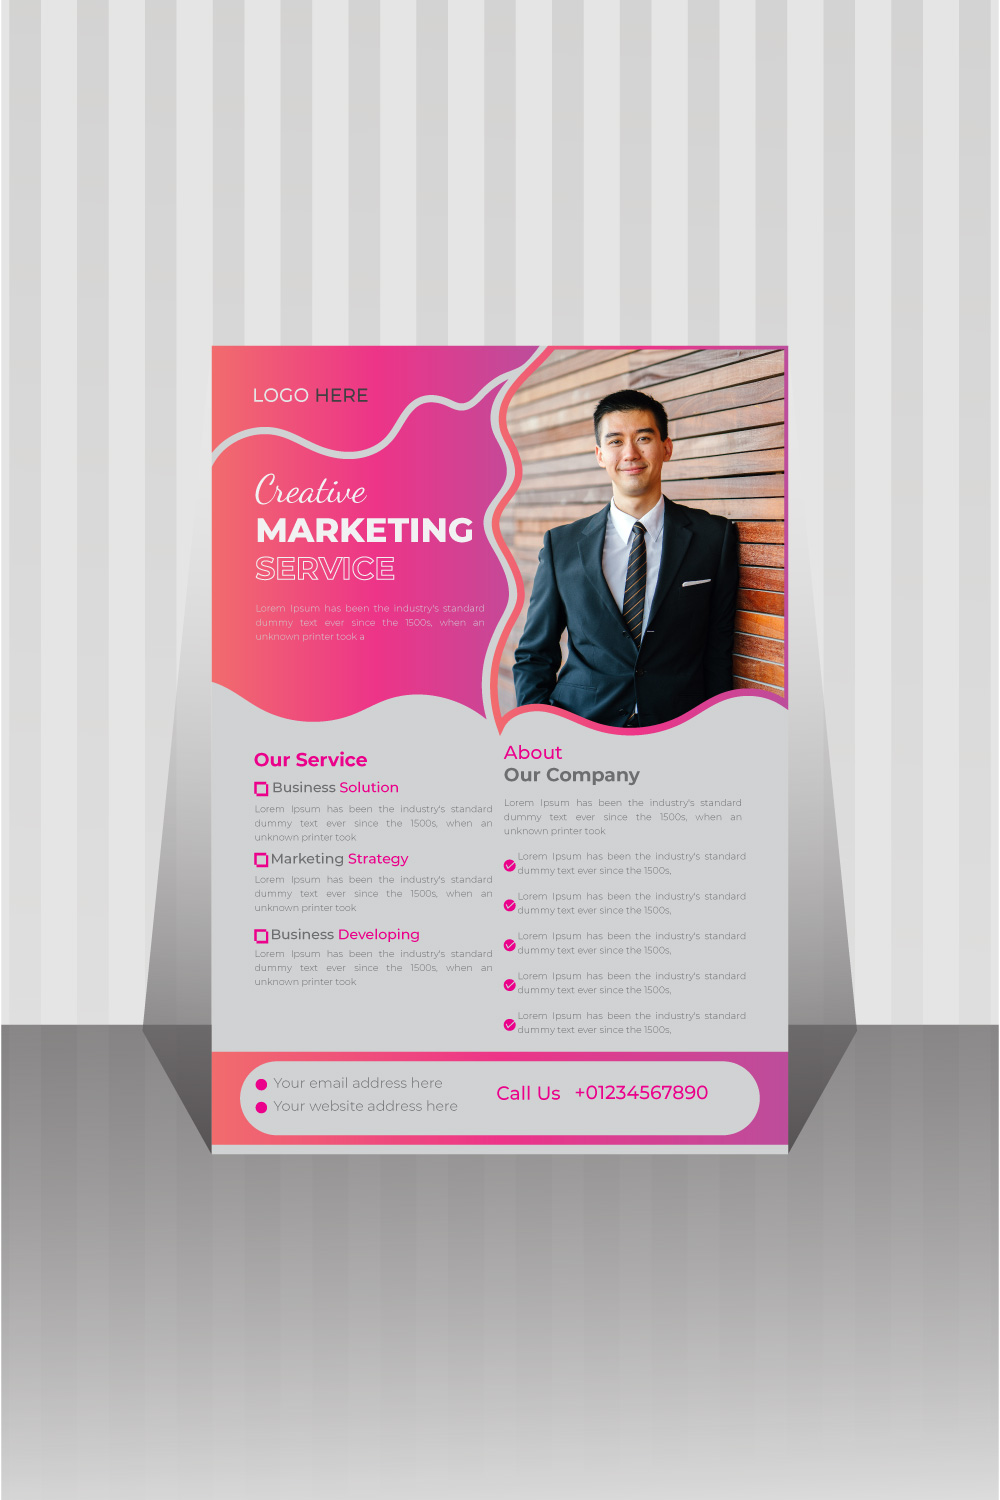 Image of corporate business flyer with enchanting design design